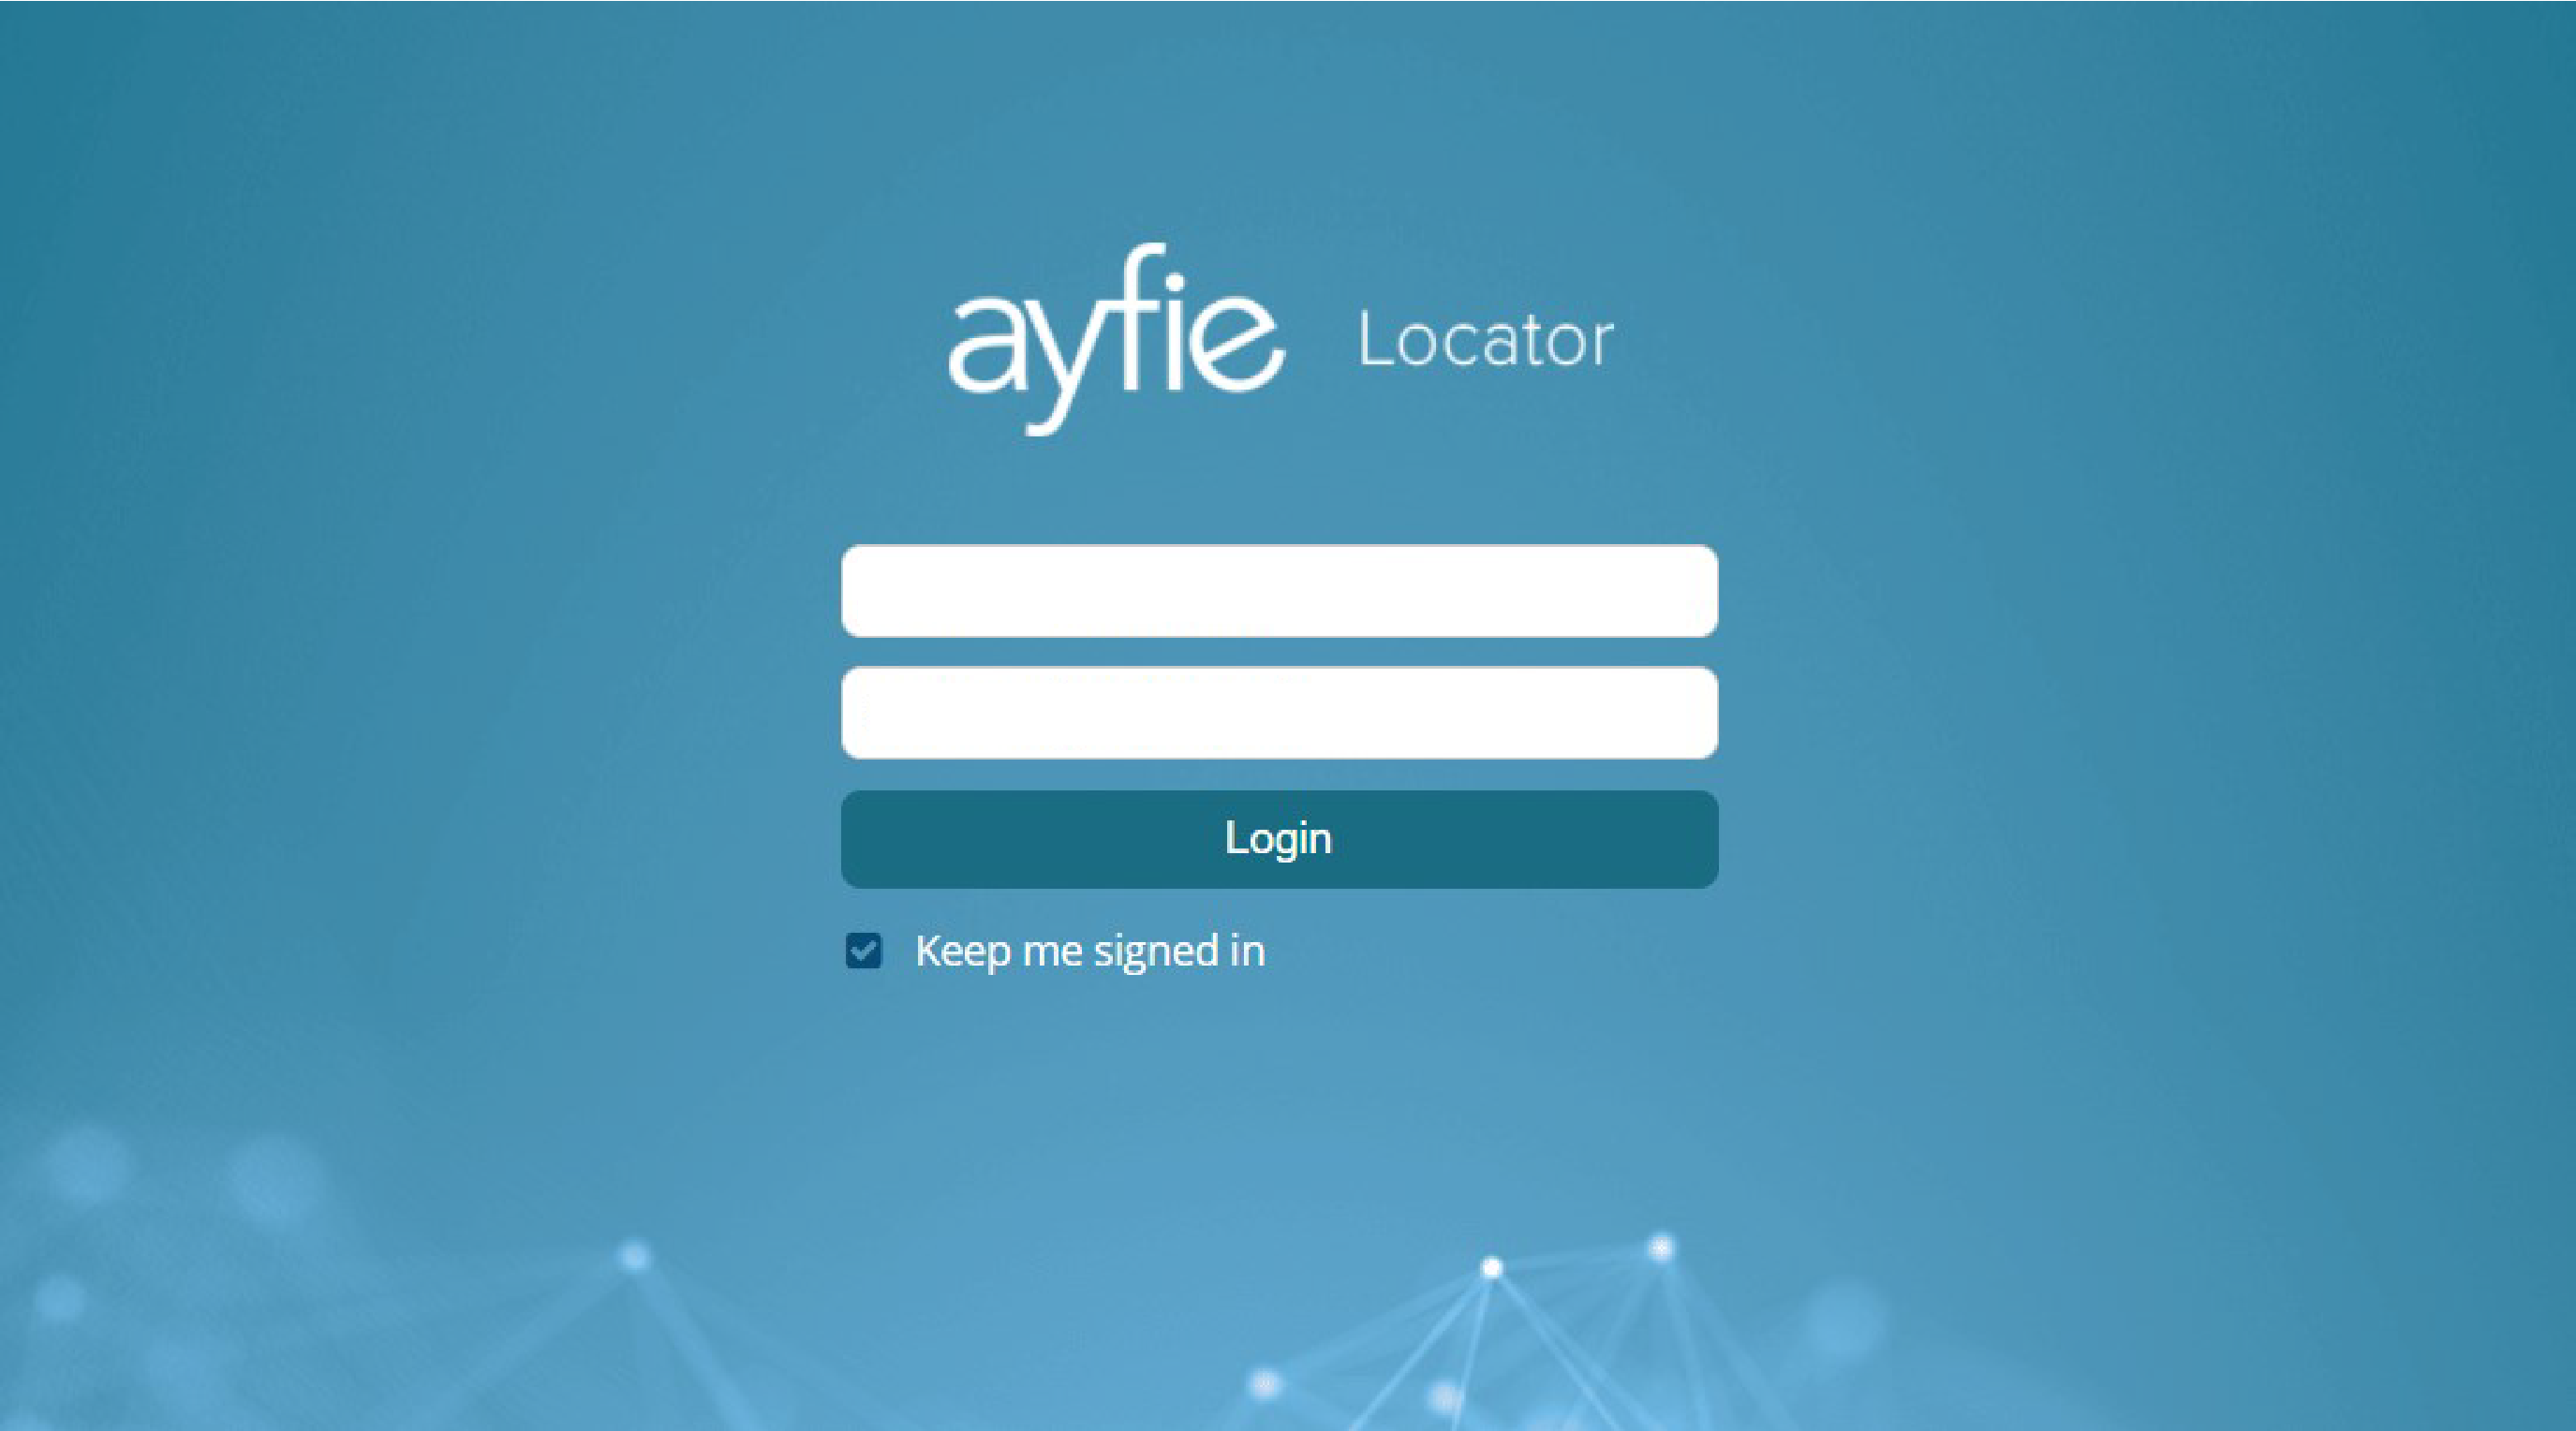 Ayfie Locator is one platform to search for and work on docments